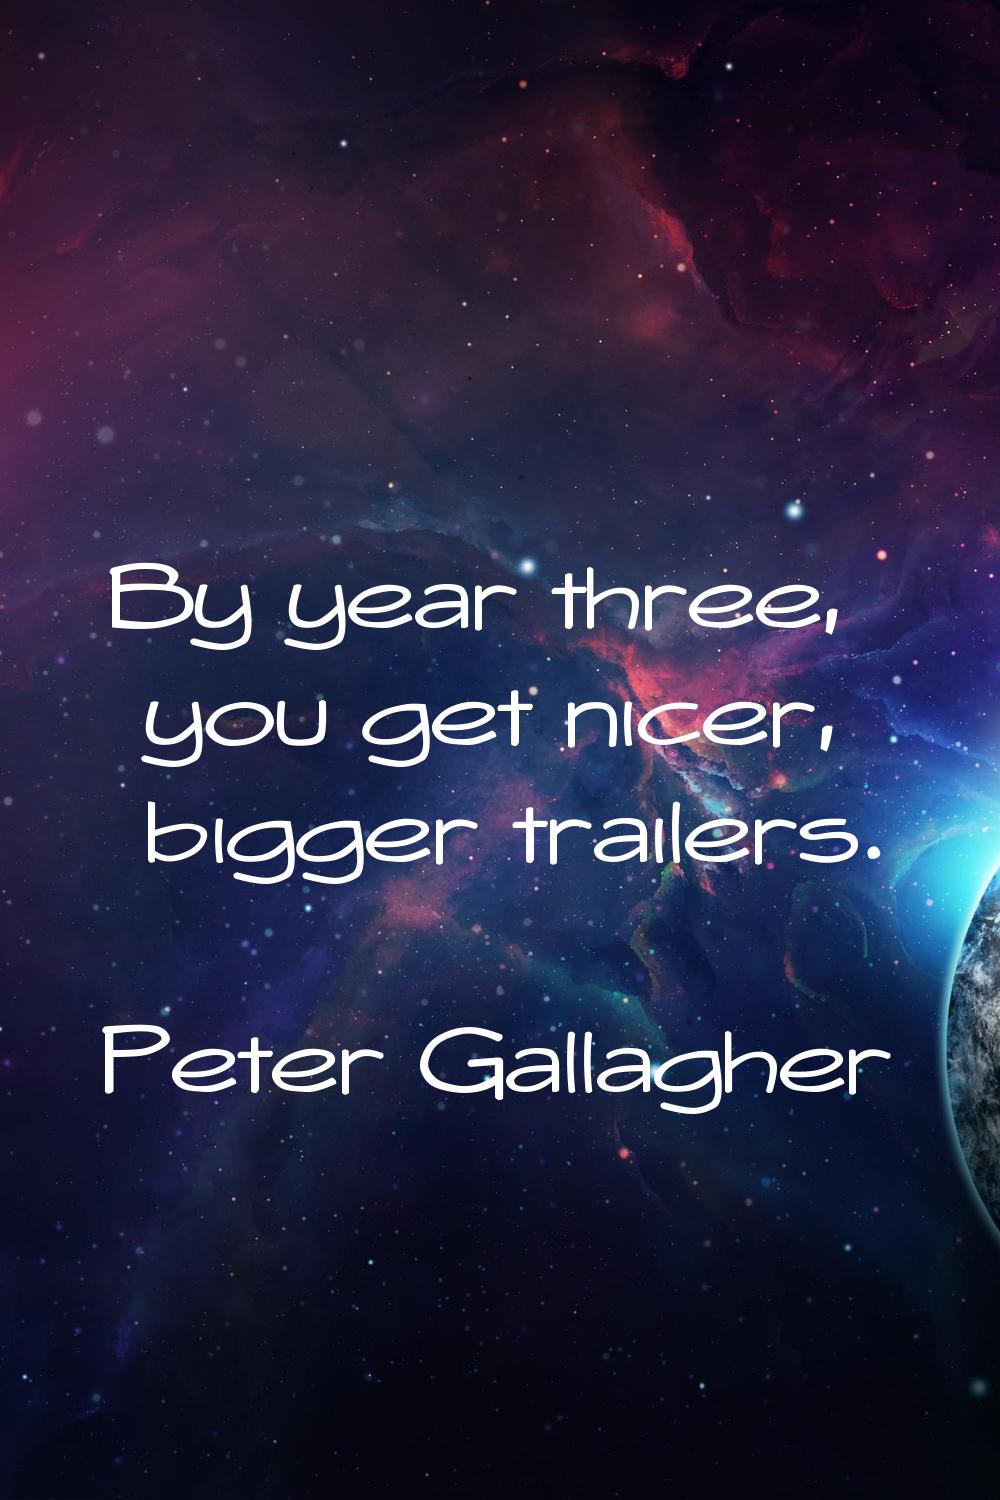 By year three, you get nicer, bigger trailers.